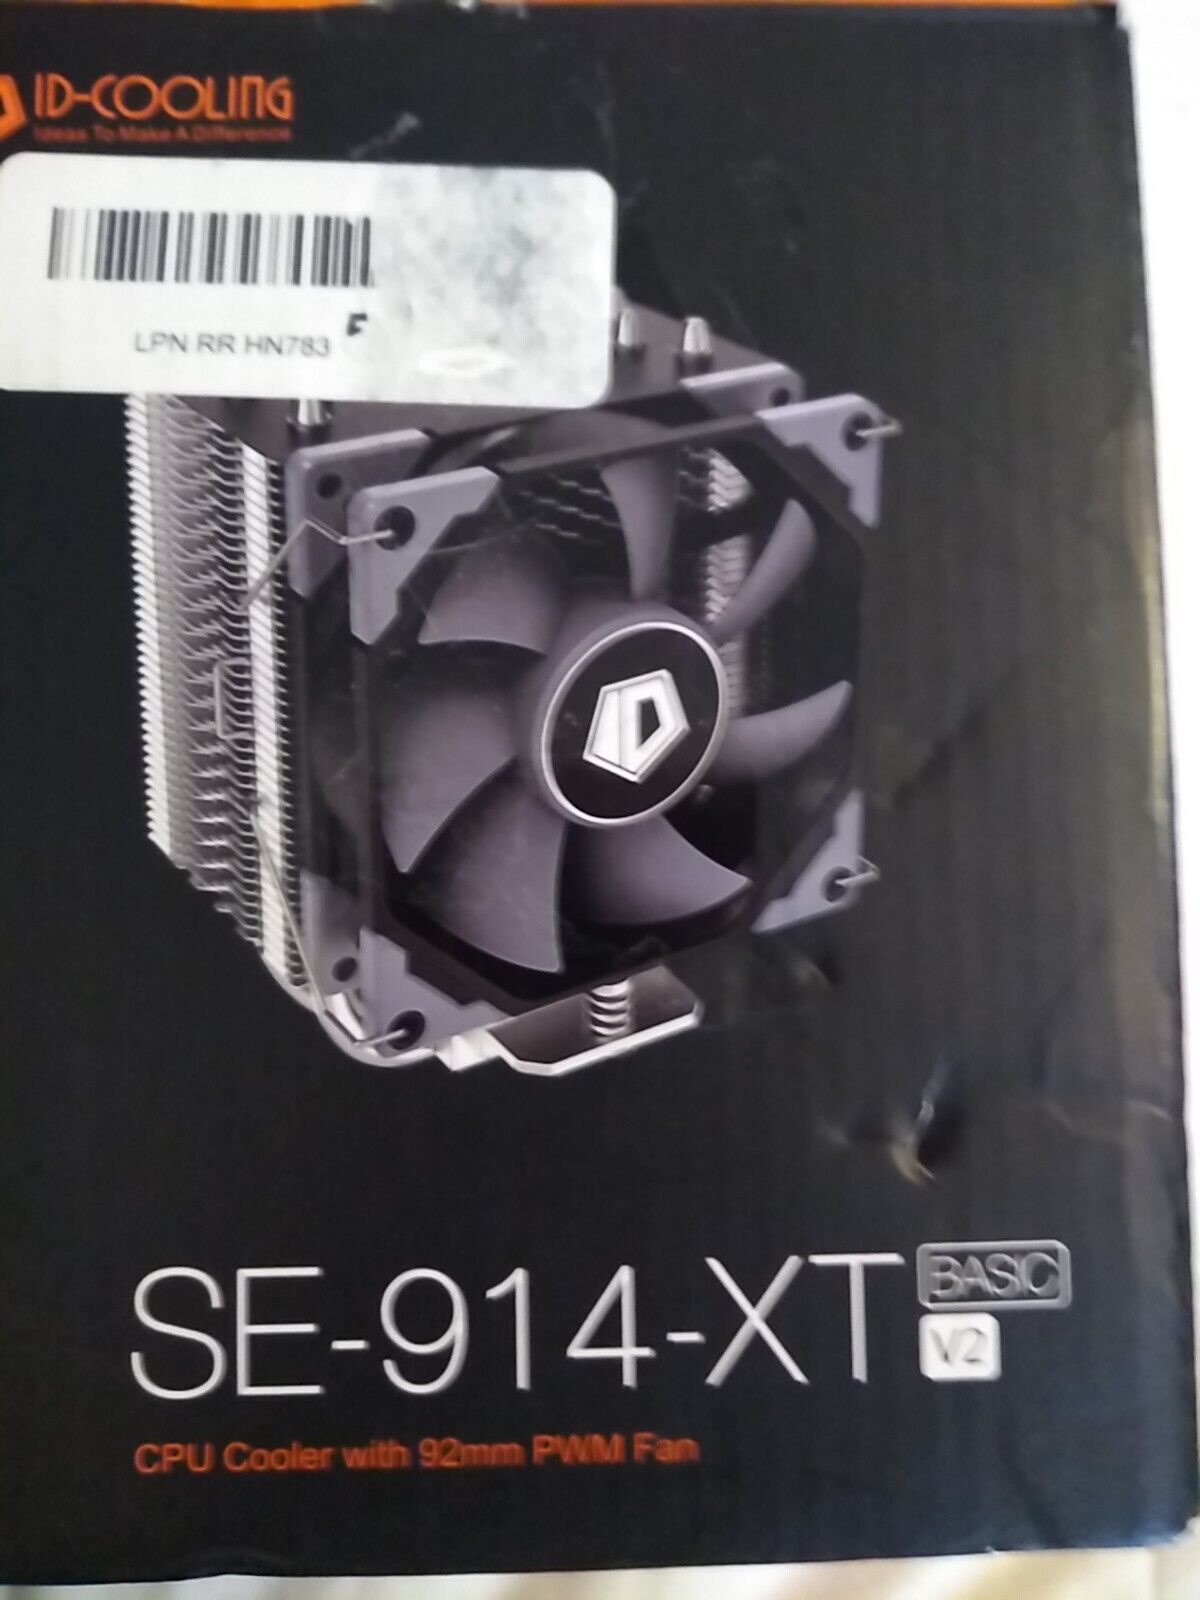 CPU ID-Cooling With 92mm PWM Fan SE-914-XT